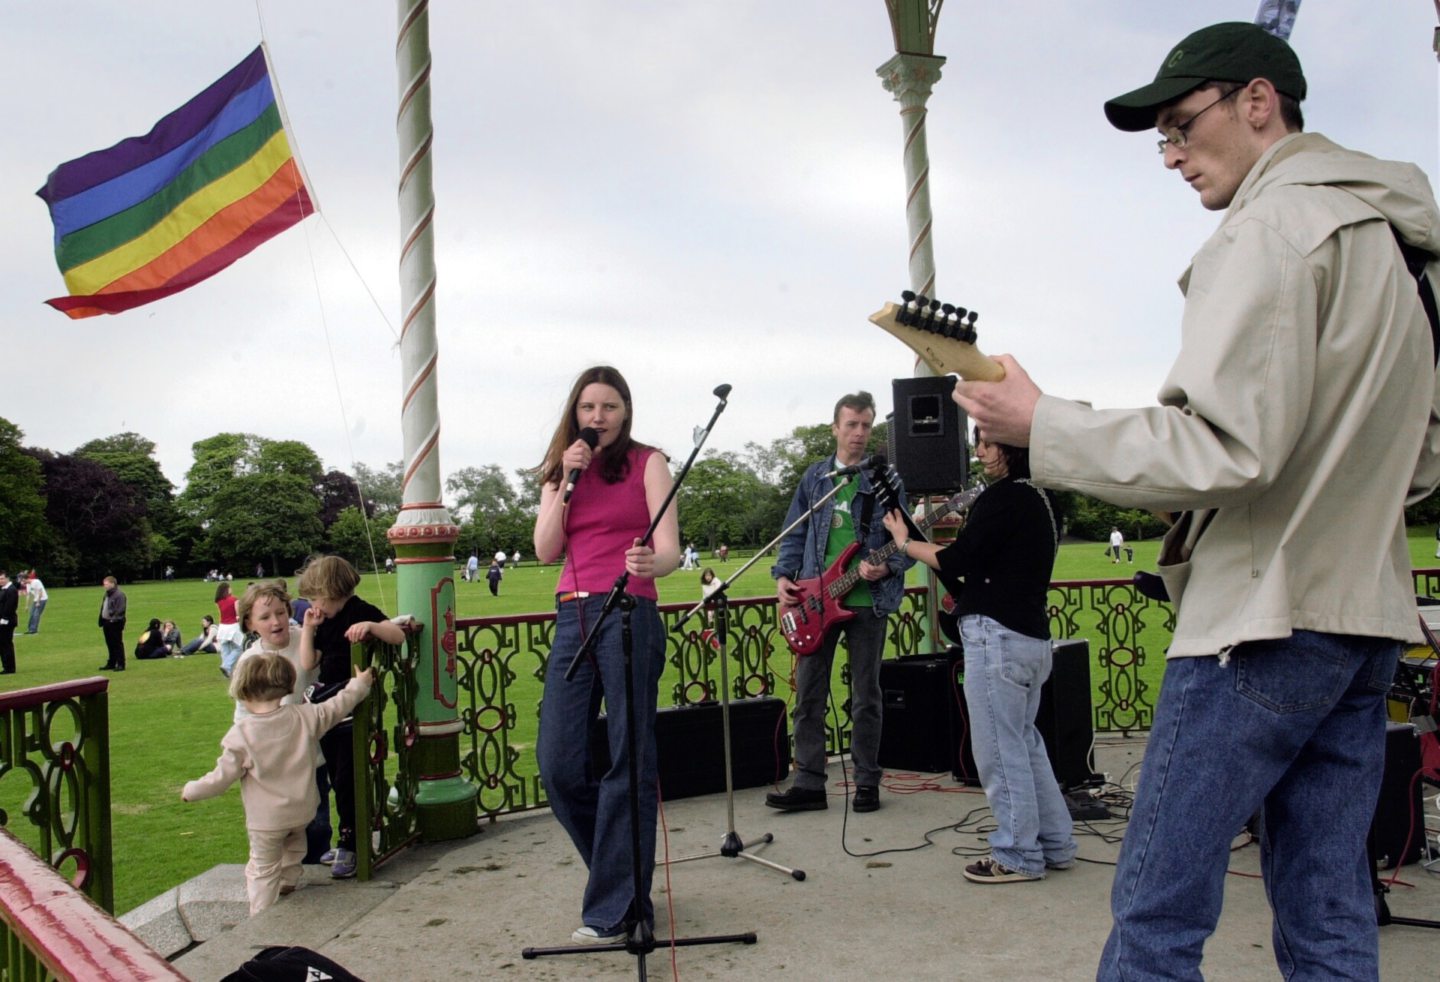 Band 'Mugshot' perform at Aberdeen's first Gay Pride Event.